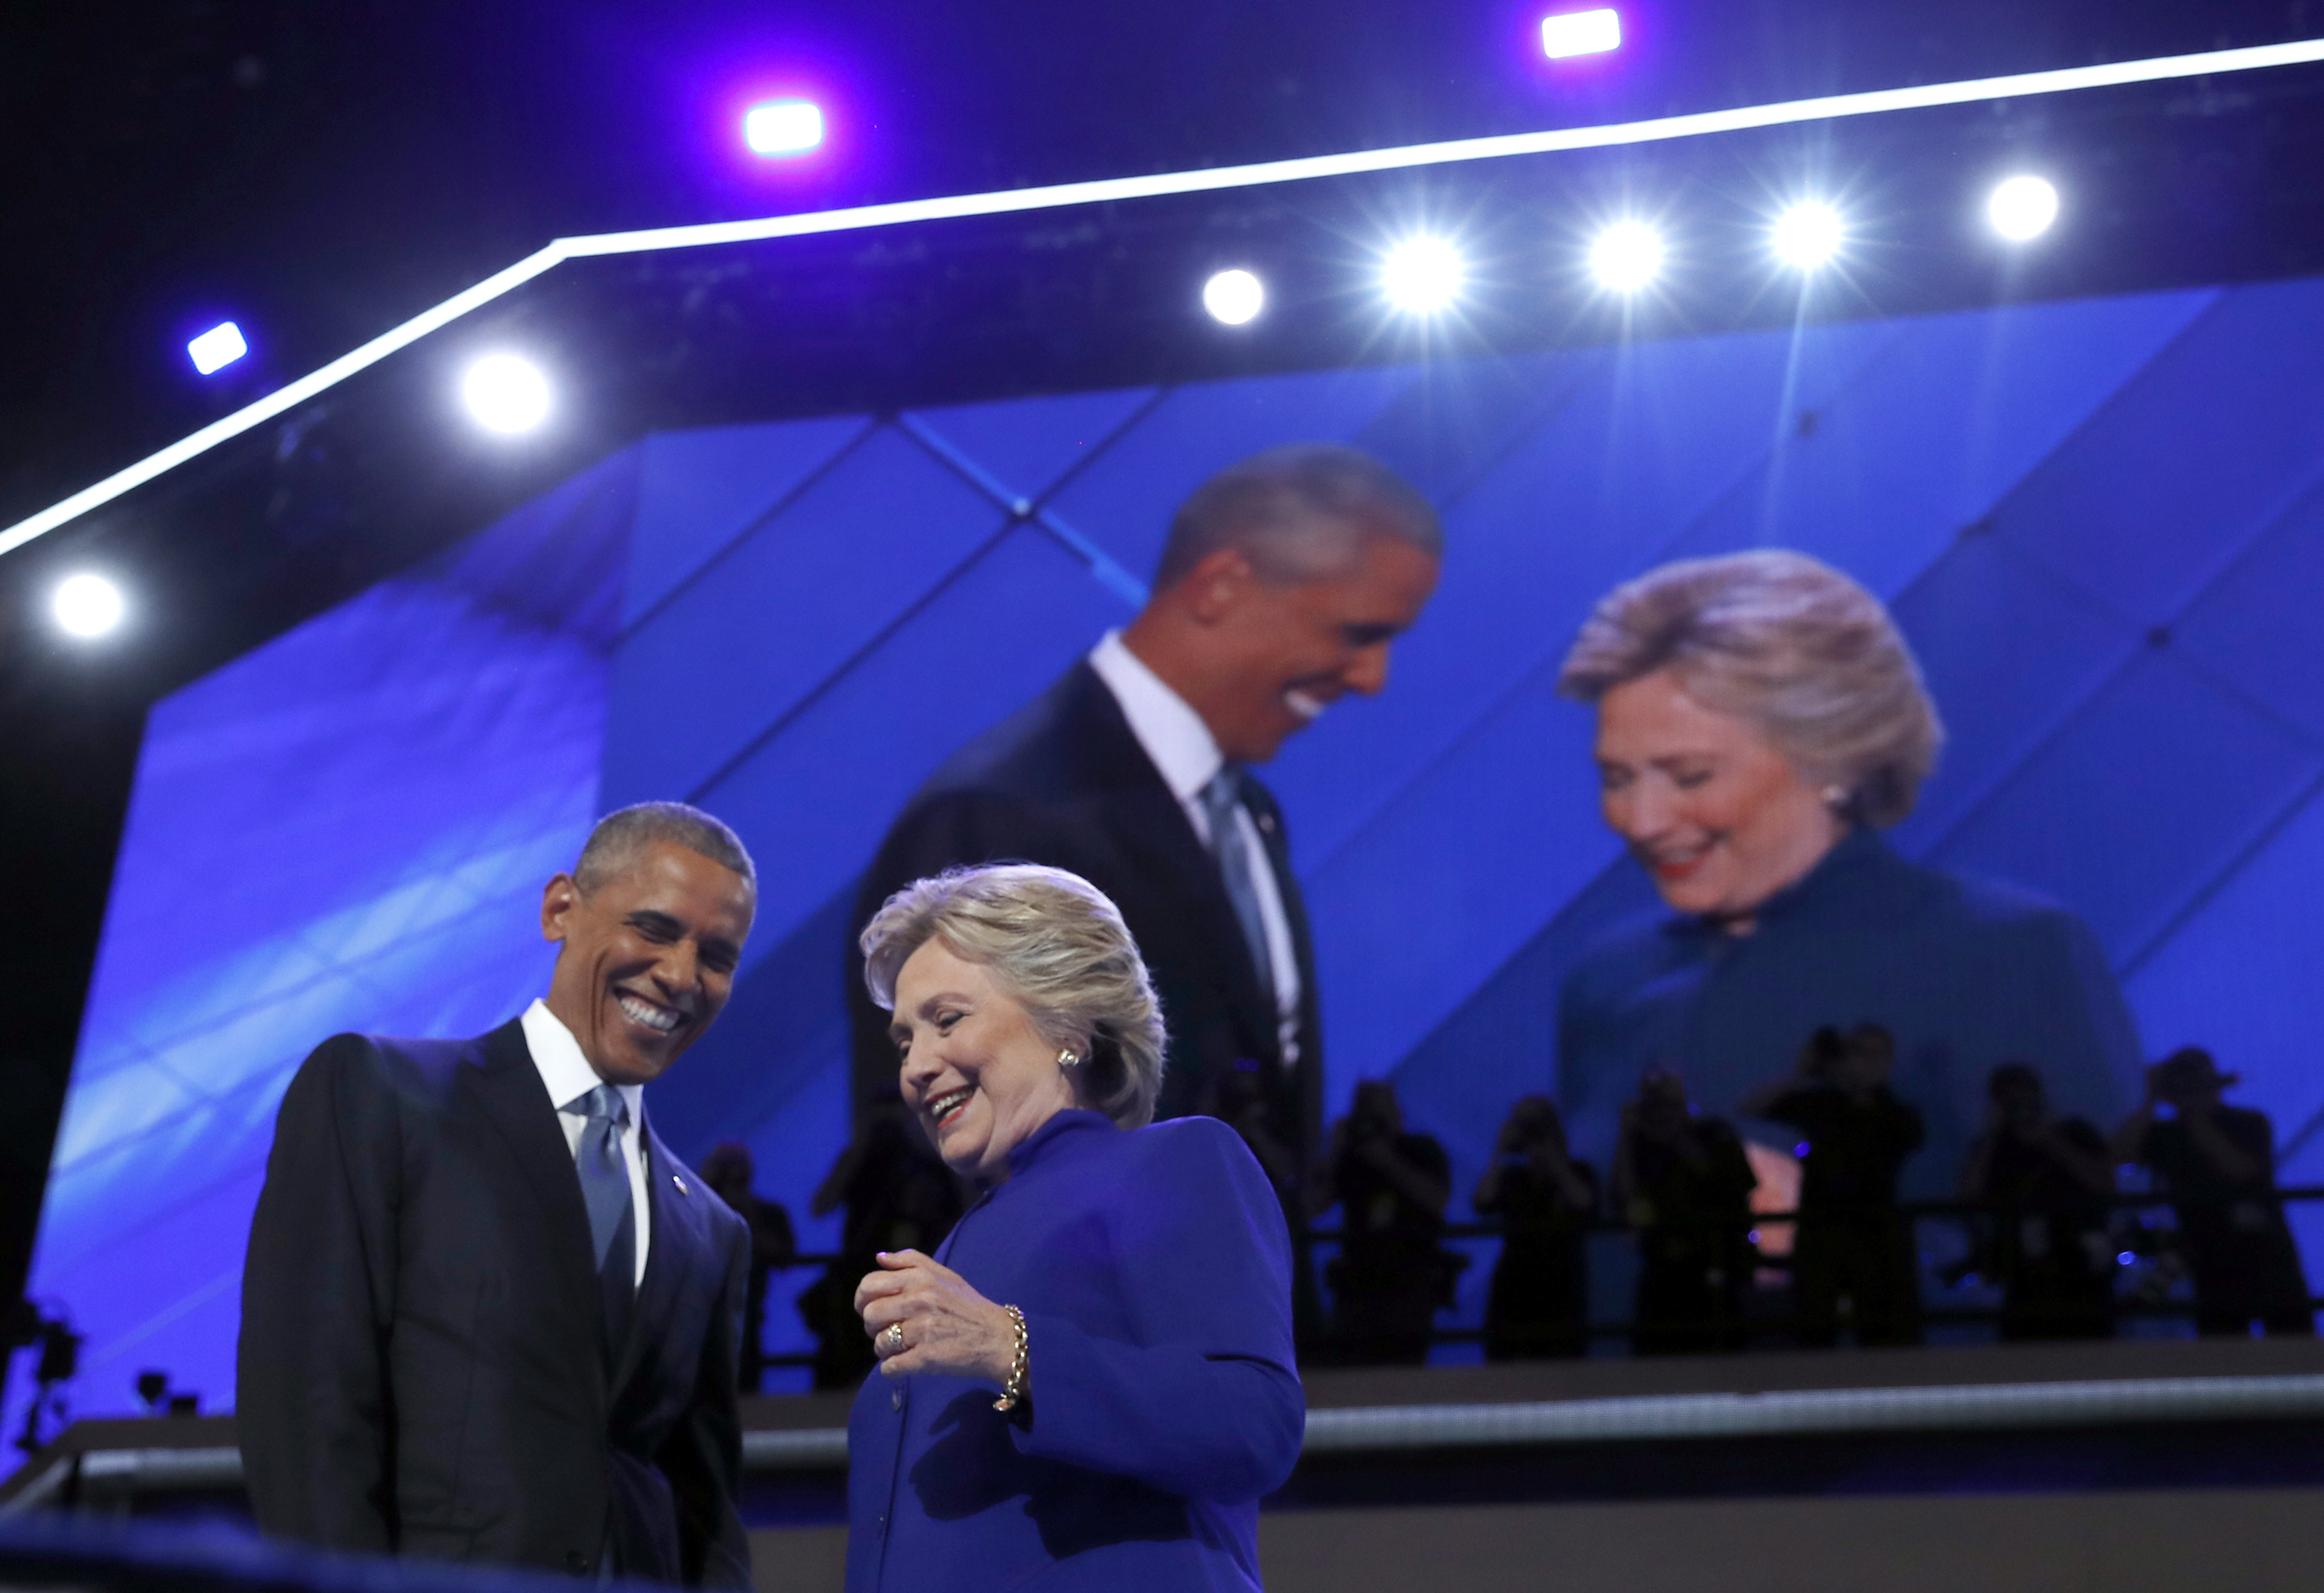 President Barack Obama is joined by Democratic presidential candidate Hillary Clinton after speaking to the delegates during the third day session of the Democratic National Convention in Philadelphia on Wednesday. (The Associated Press)